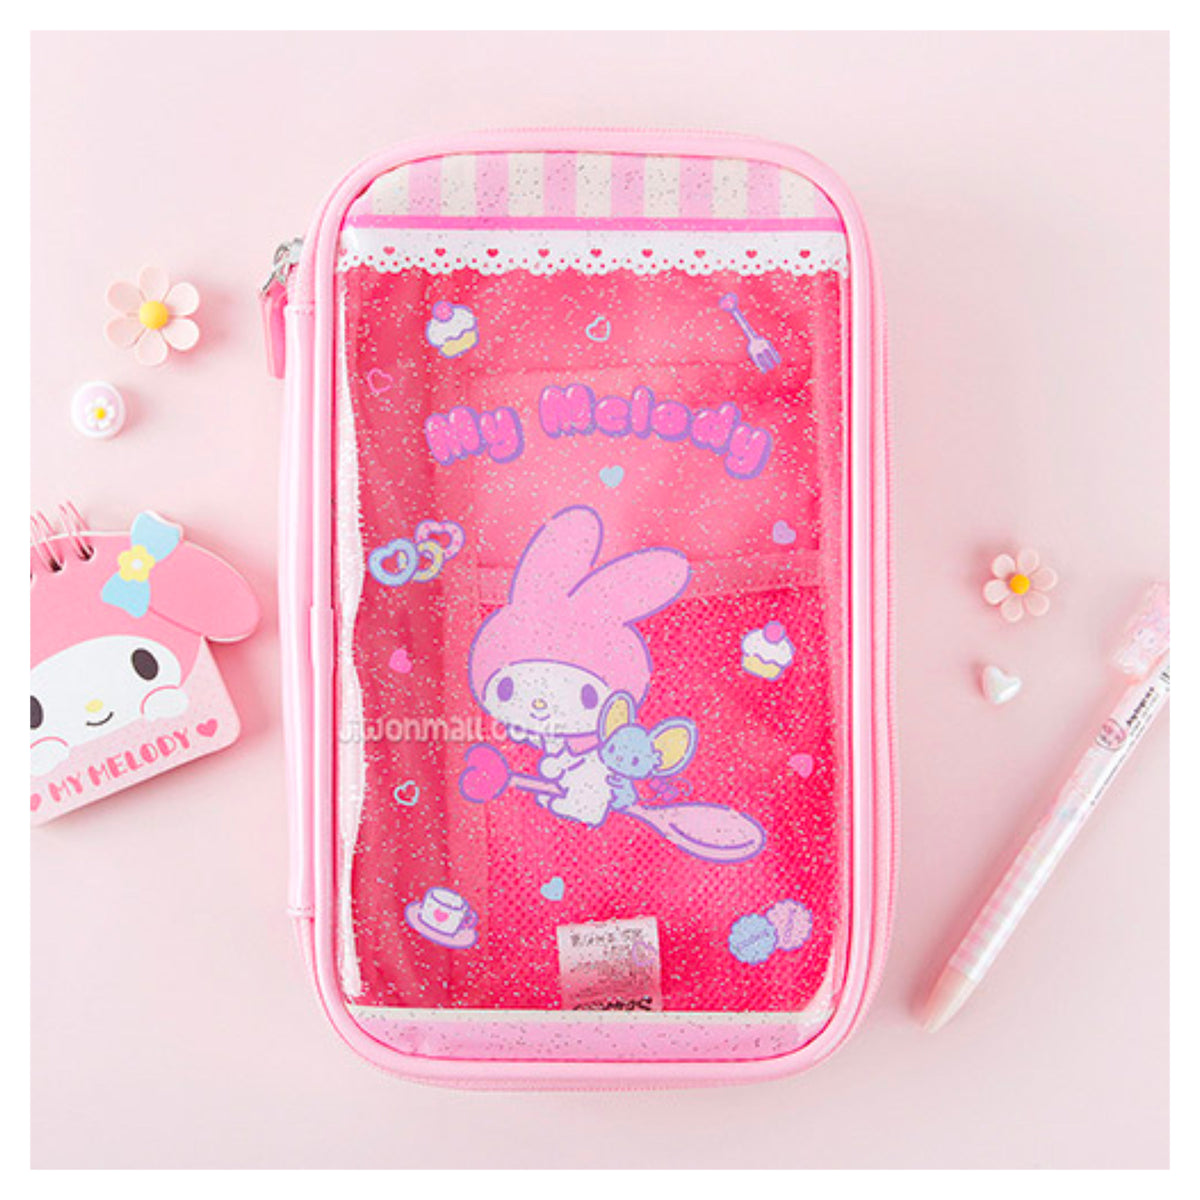 Sanrio Large Transparent Pouch - My Melody